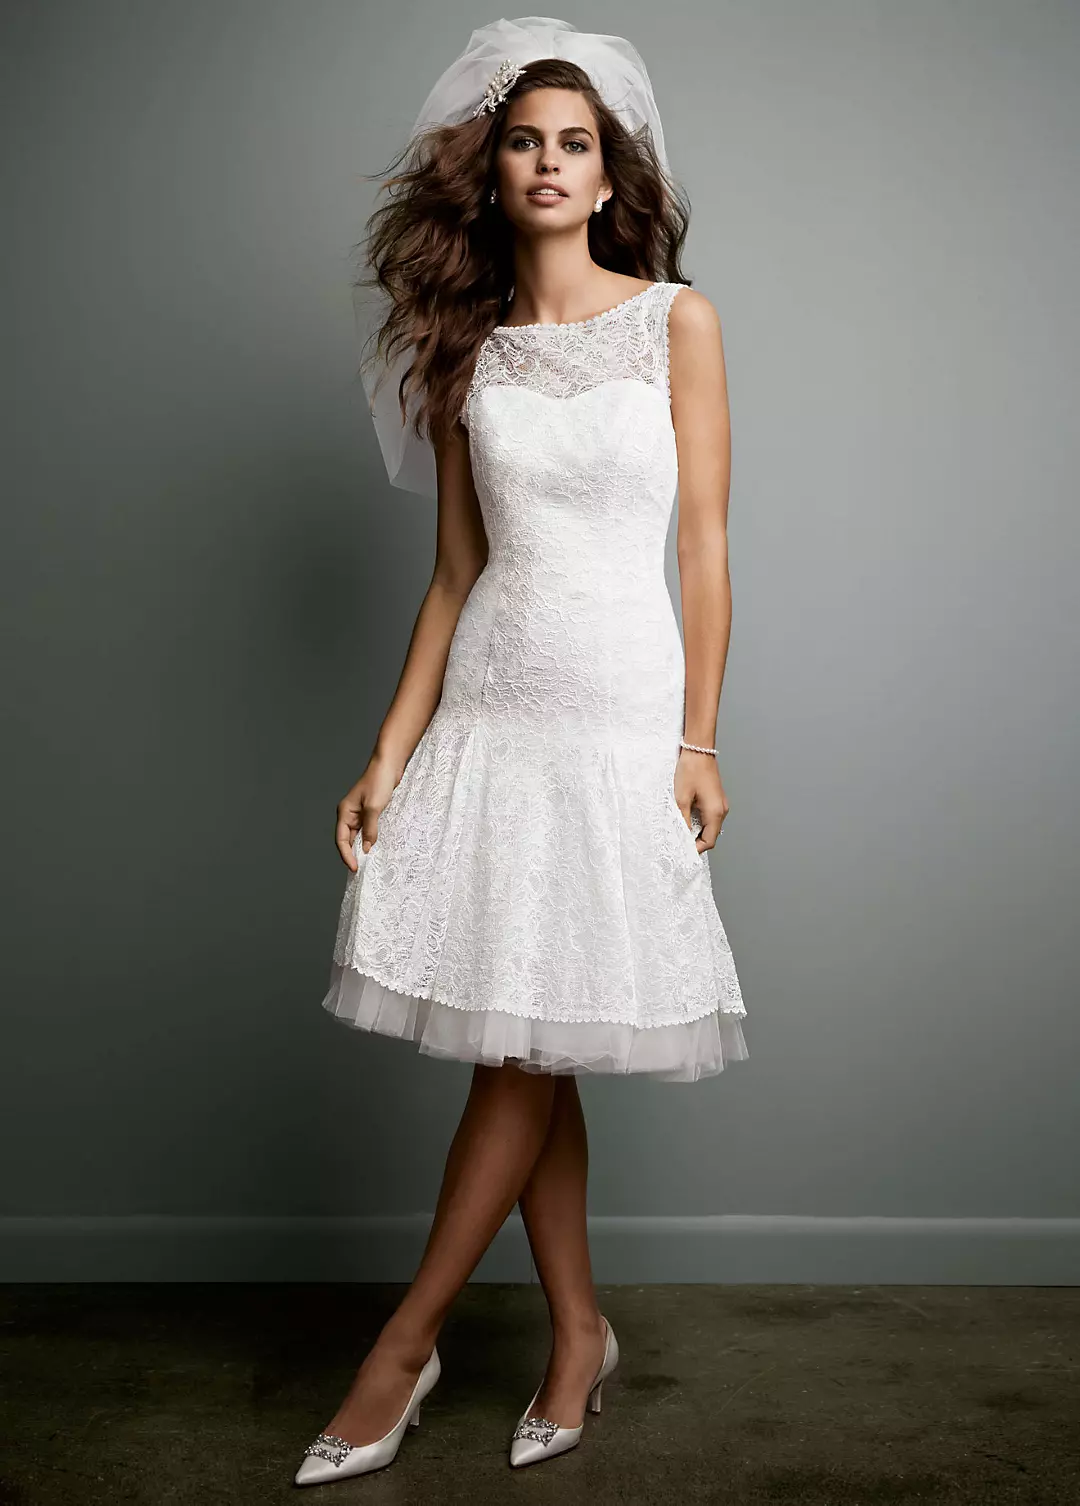 All Over Lace Short Dress with Illusion Neckline Image